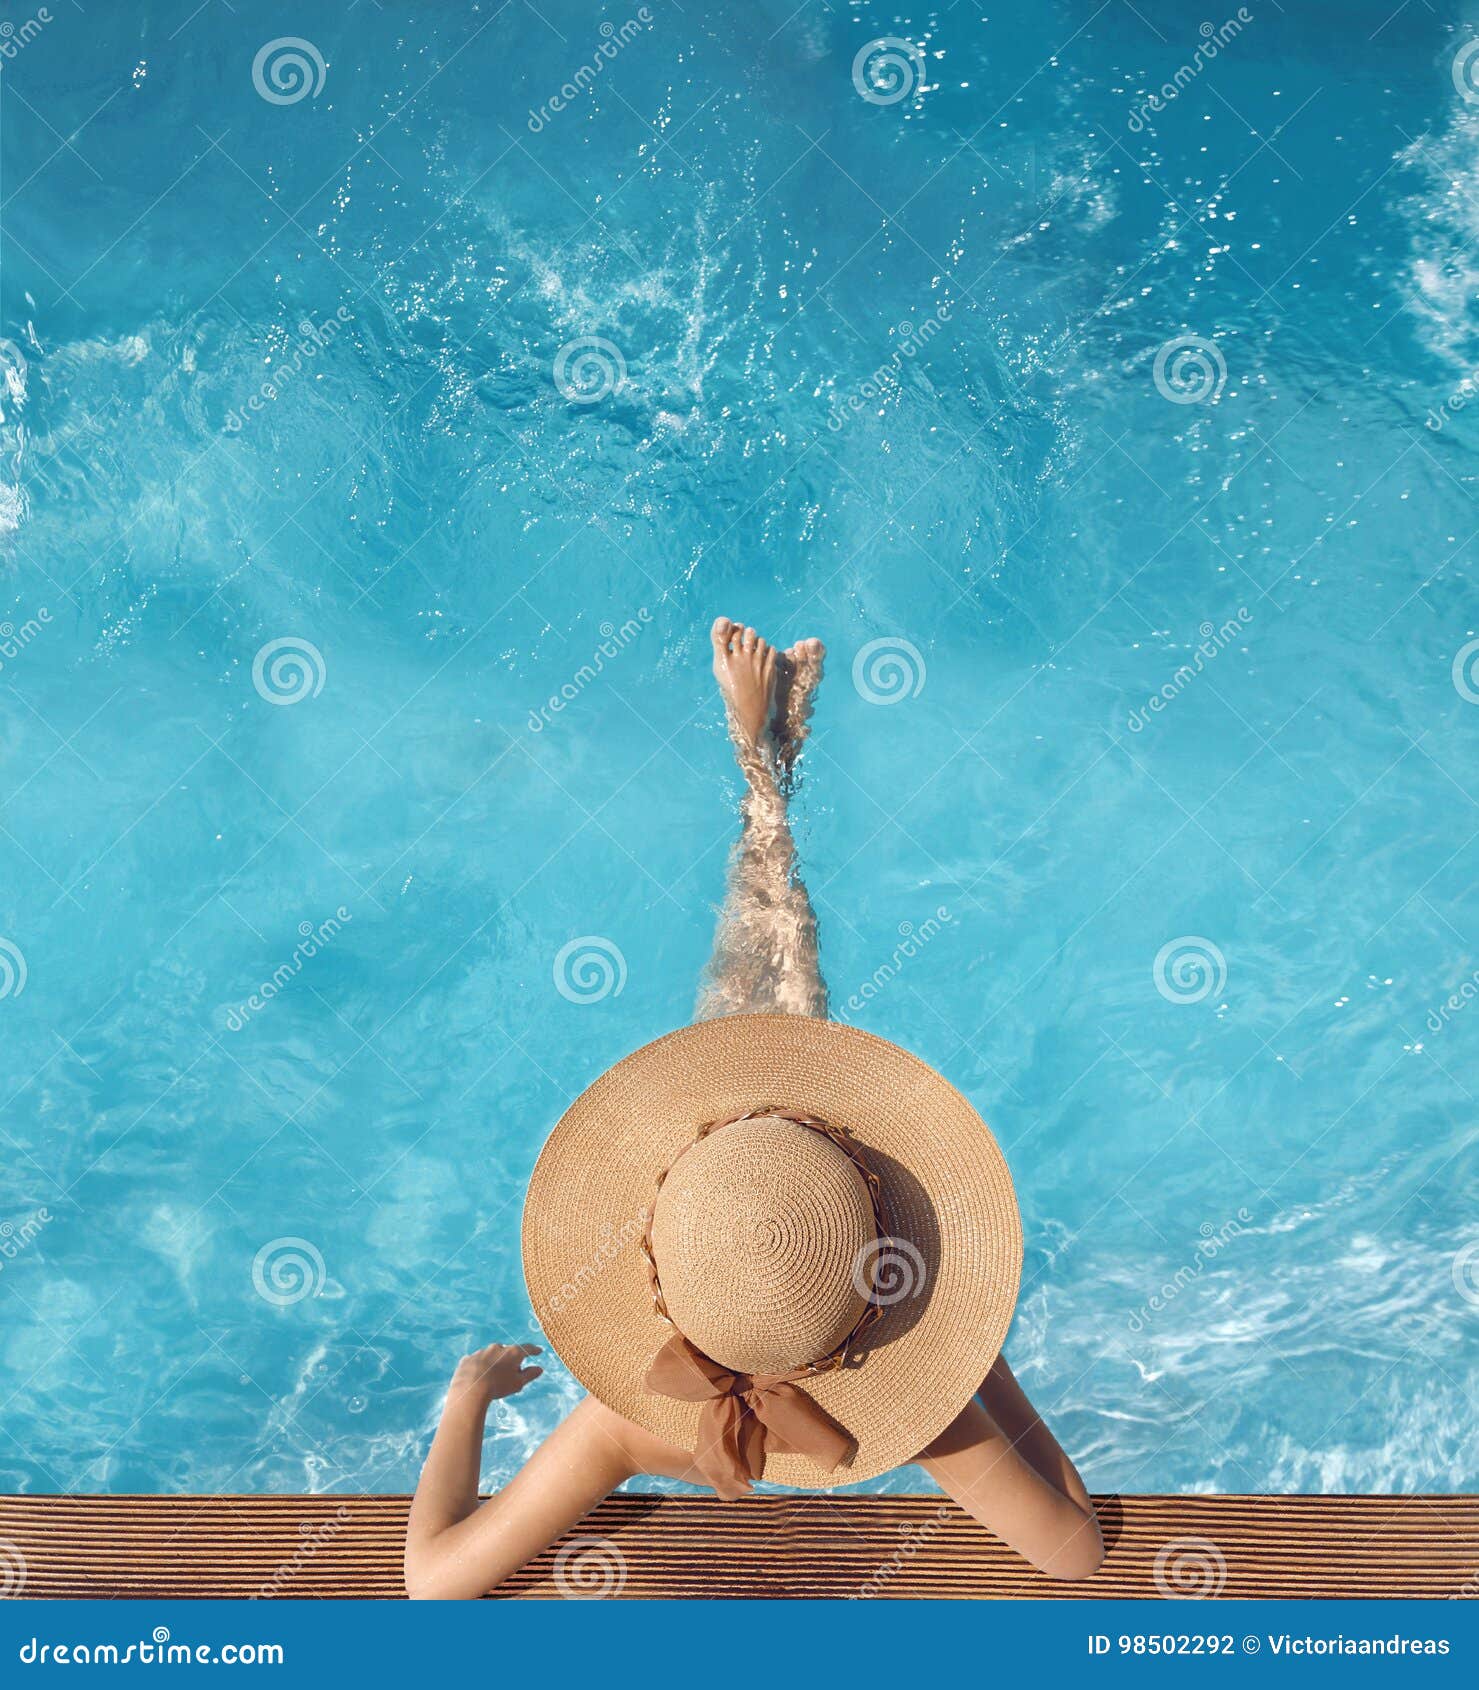 top view of woman in straw hat relaxing in swimming pool at luxury villa resort. summer holiday idyllic background. vacations con